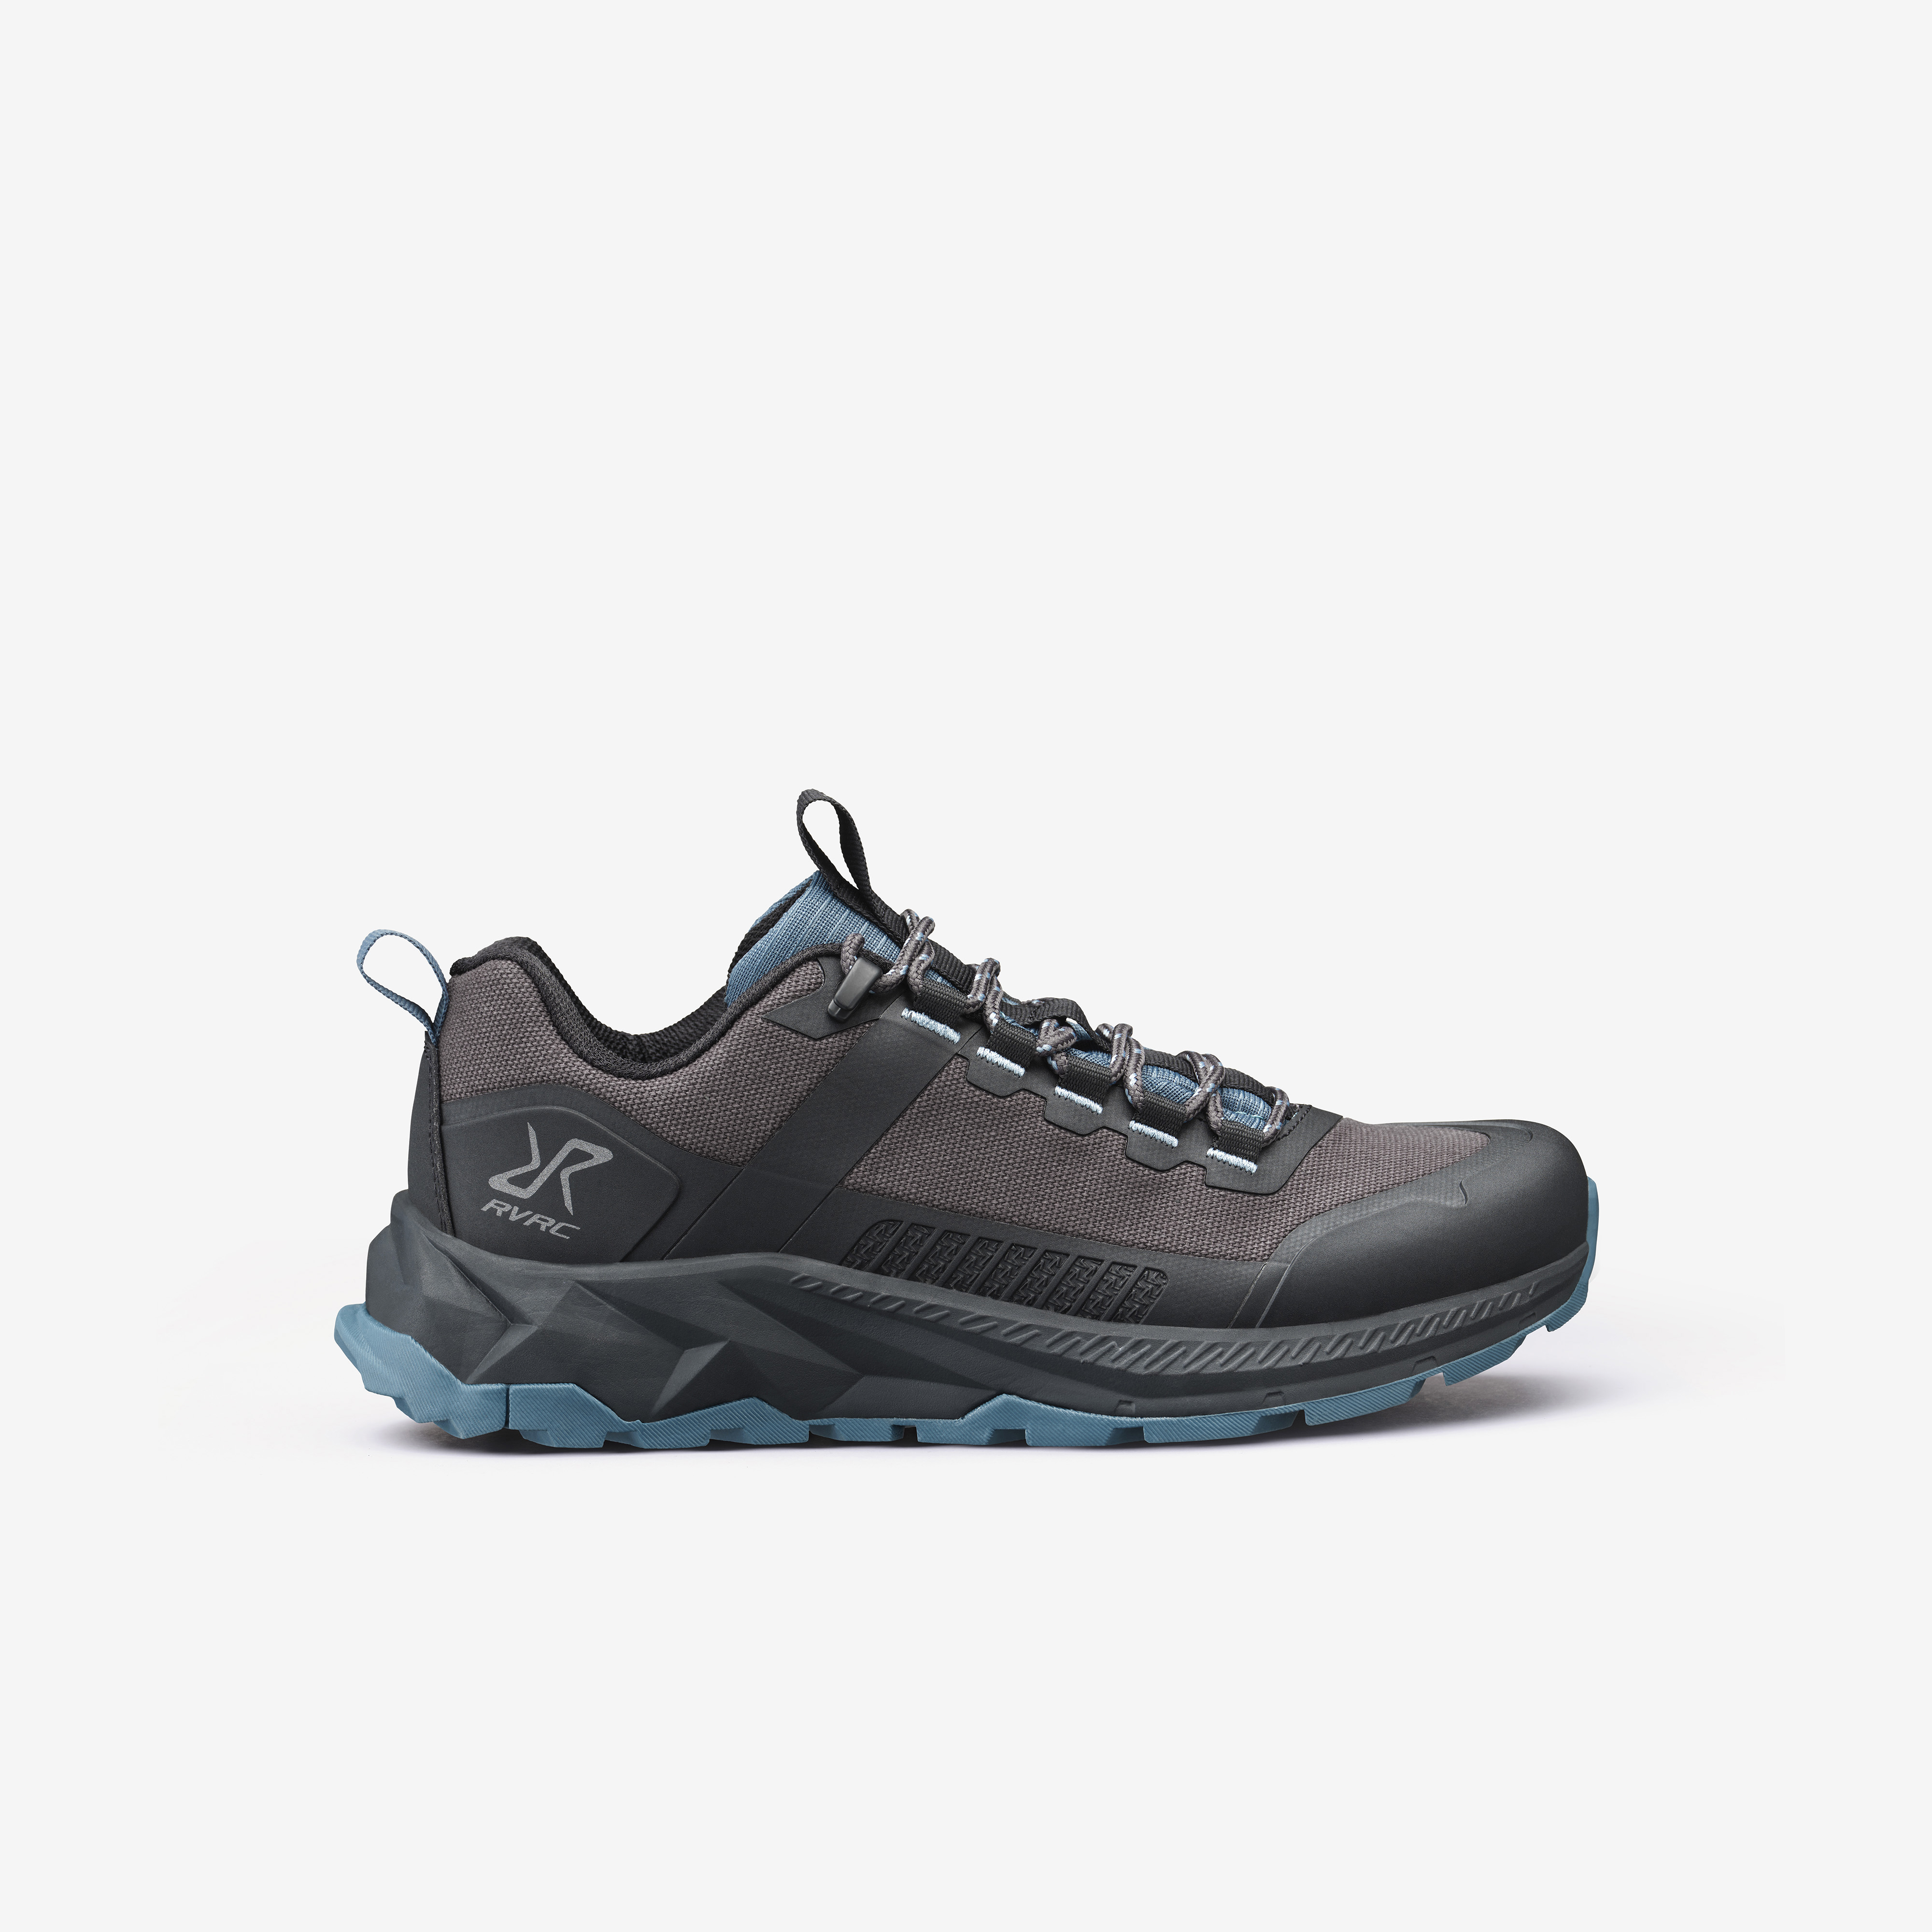 Phantom Trail Low Hiking Shoes Anthracite Mujeres